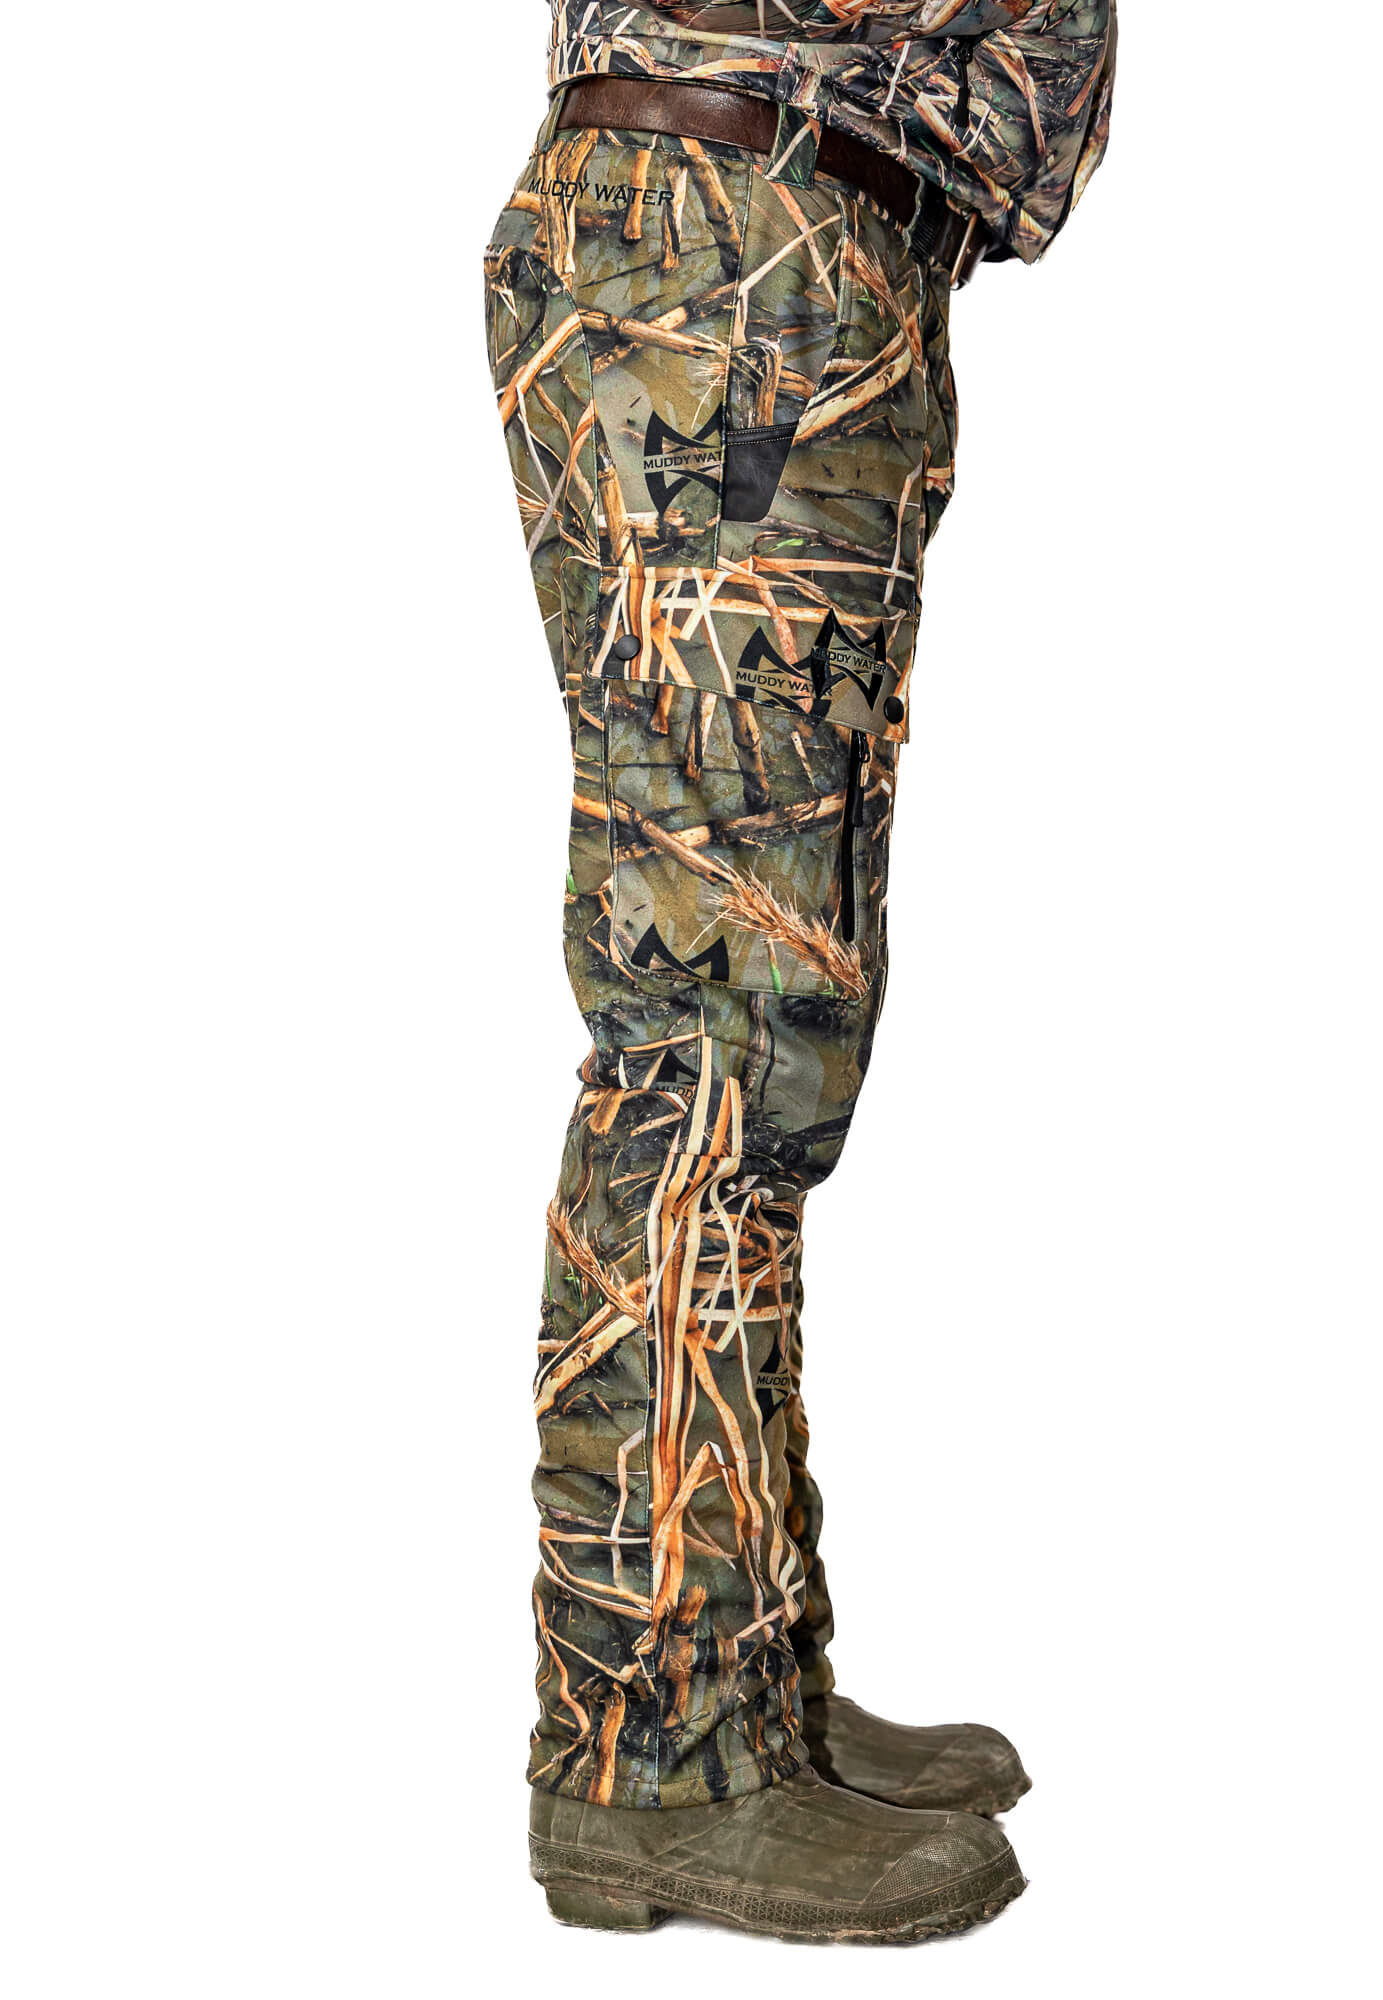 Outfitter Series Scout Pant - Classic - Muddy Water Outdoors